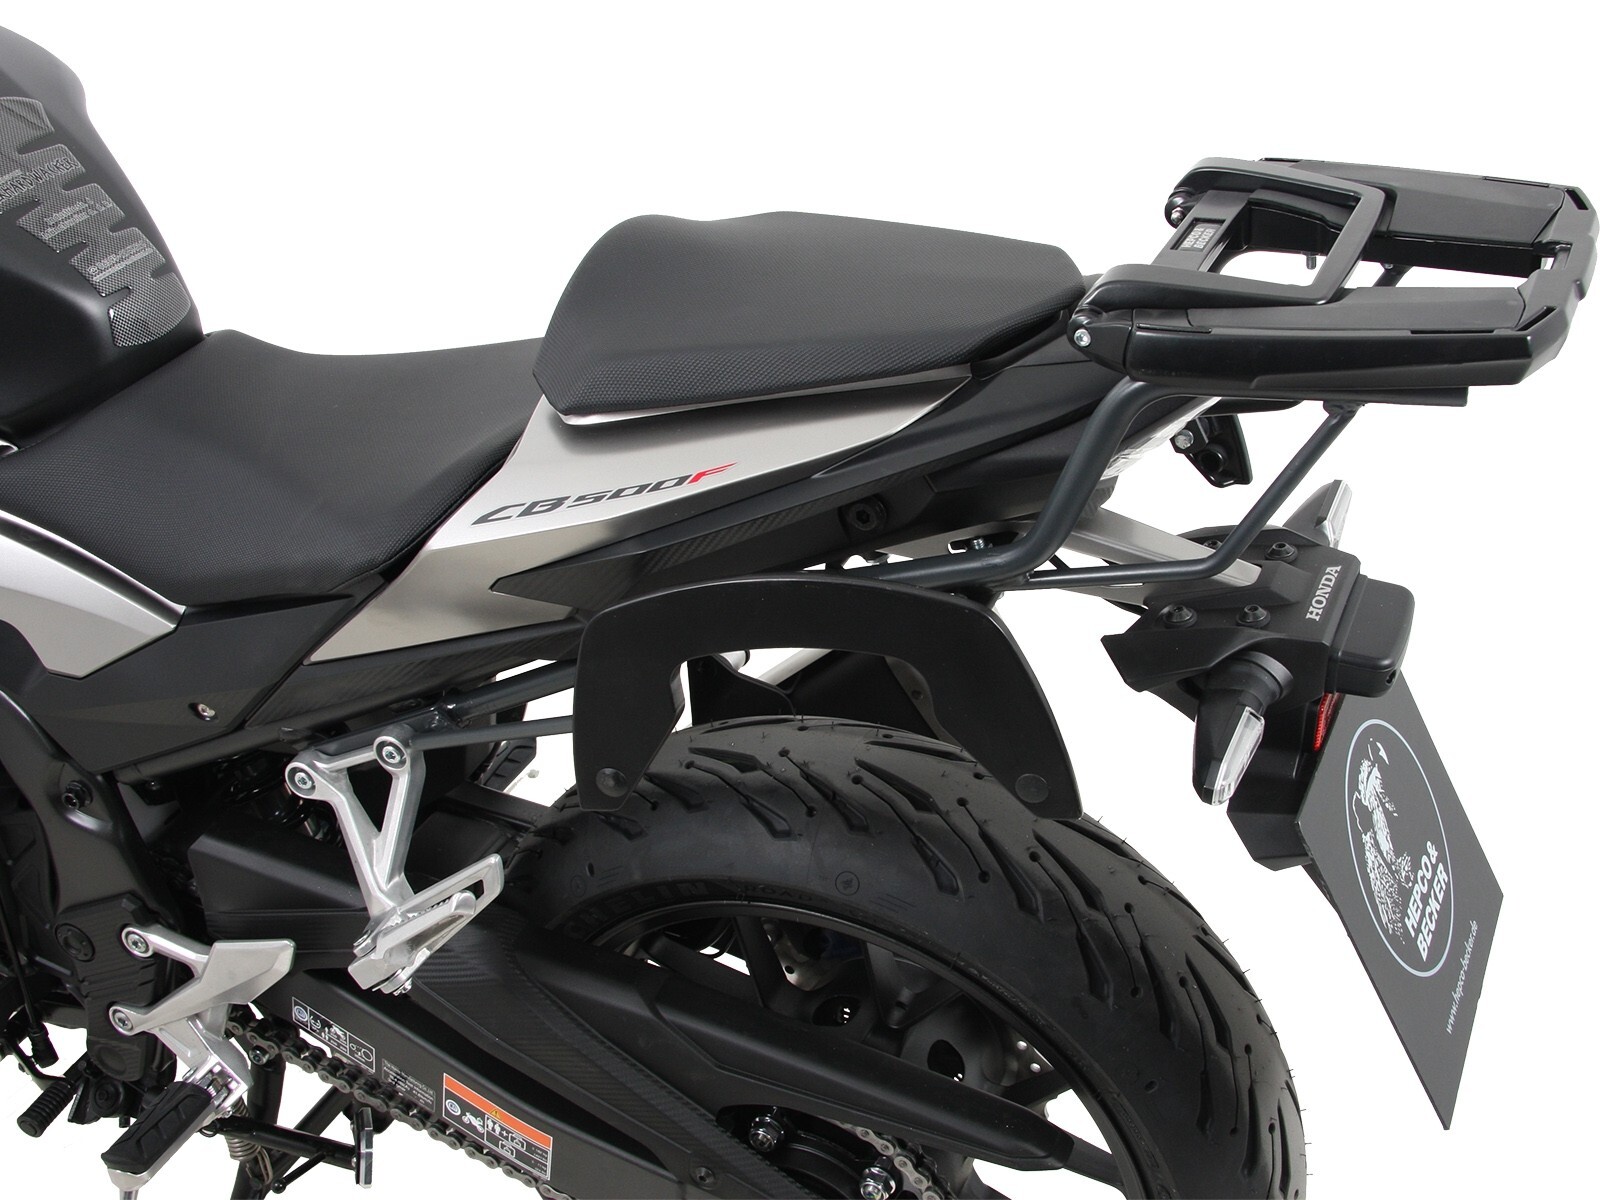 Minirack Soft Luggage Rear Rack BY HEPCO AND BECKER From 2017 Honda X-ADV